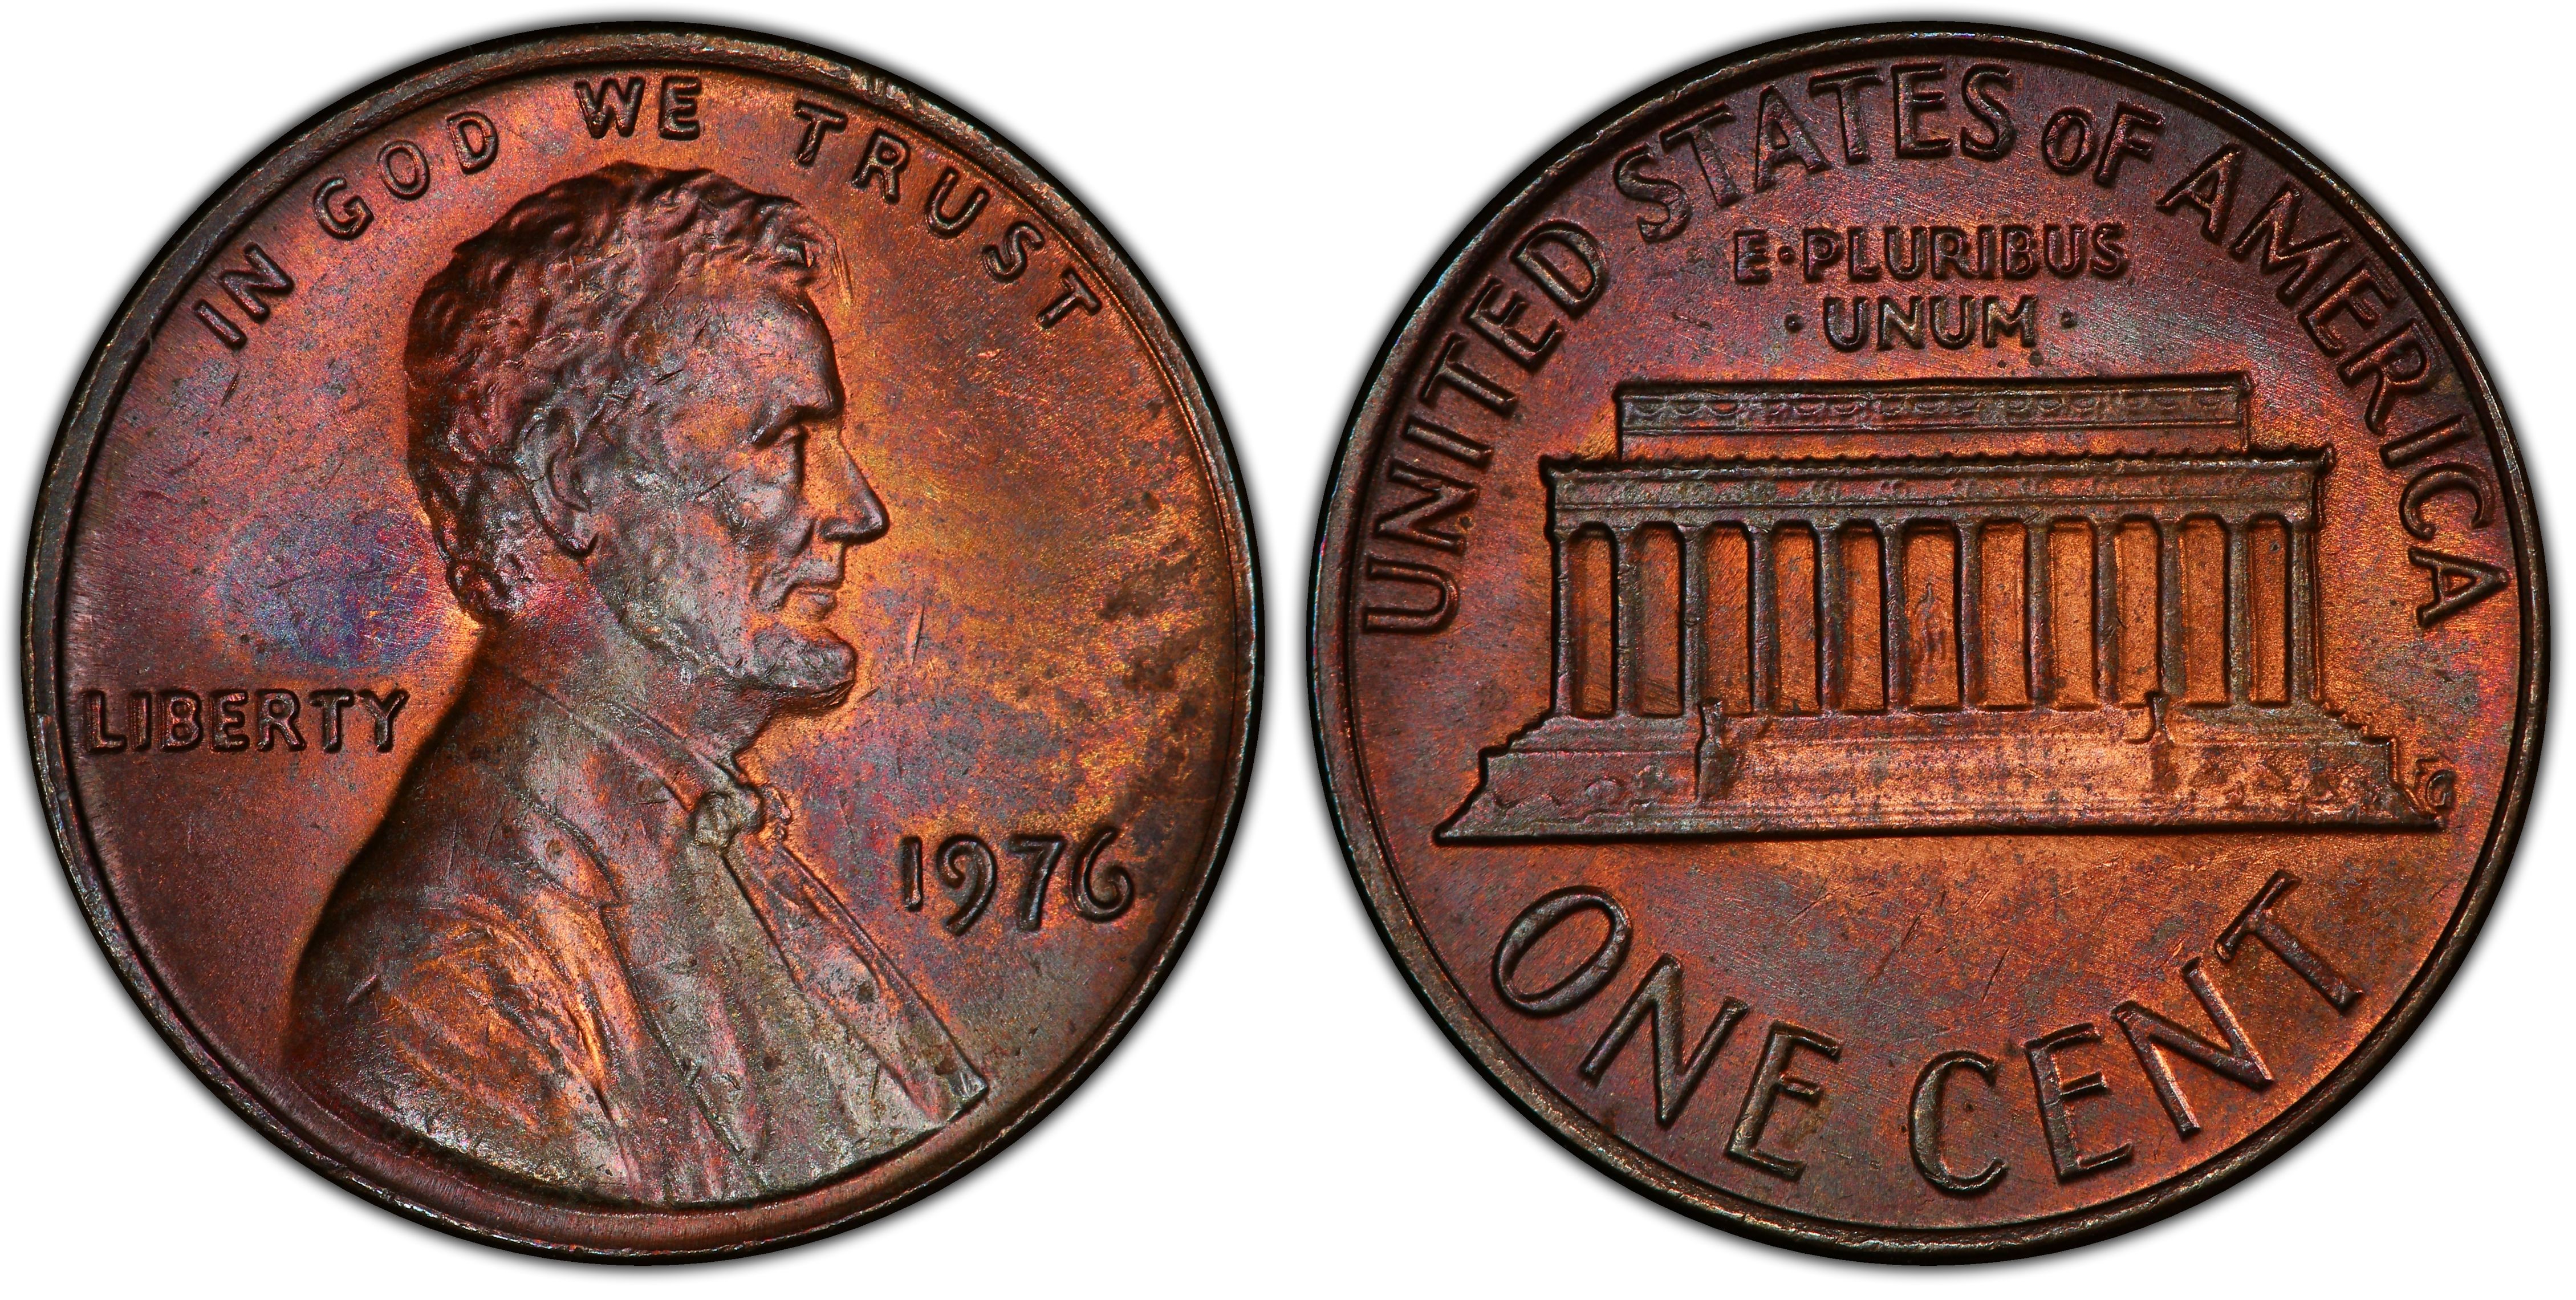 1943 1C Bronze, BN (Regular Strike) Lincoln Cent (Wheat Reverse) - PCGS  CoinFacts